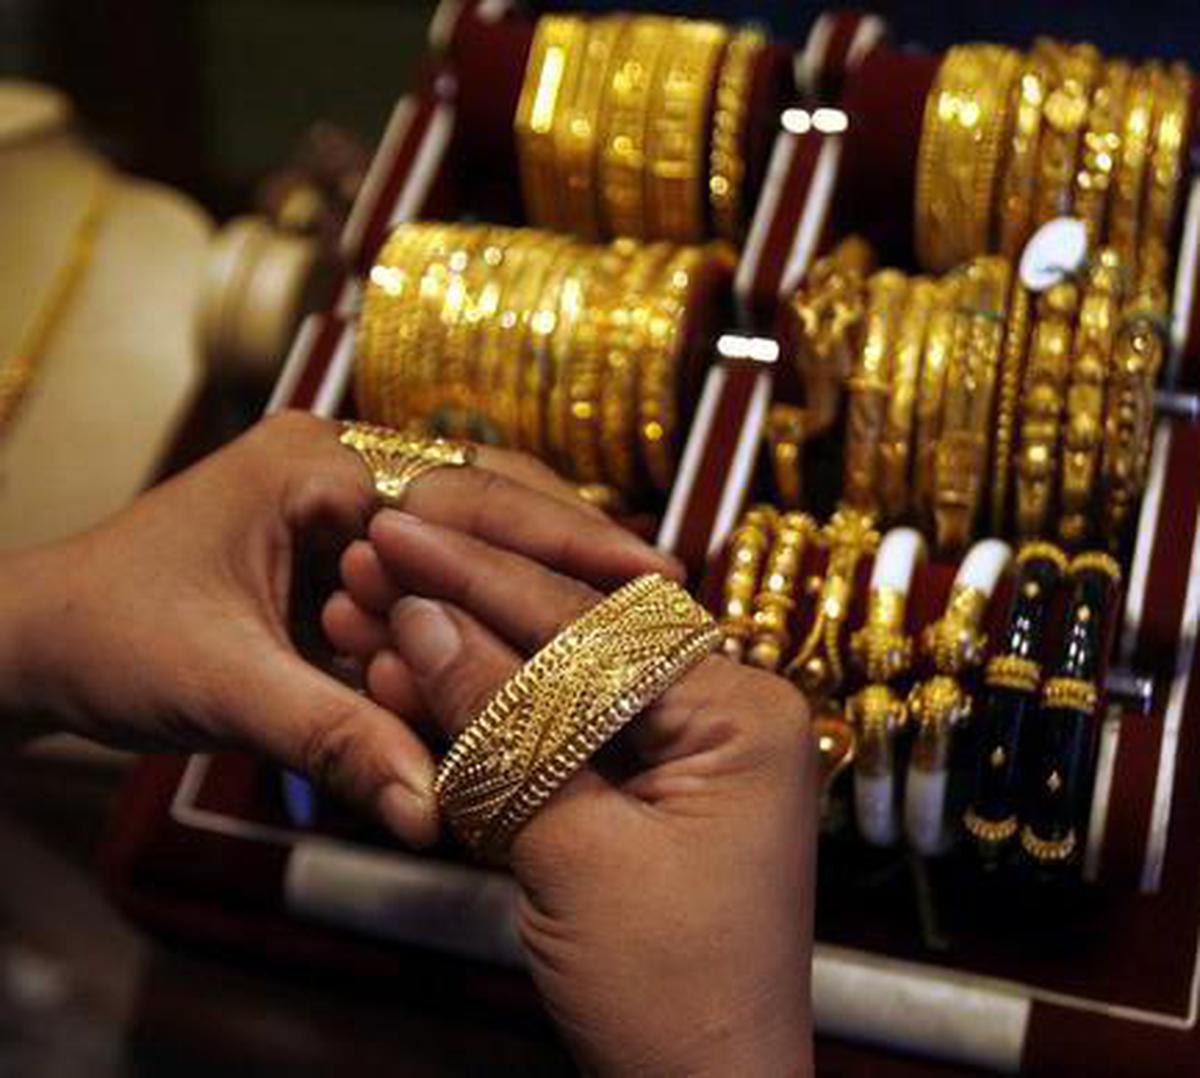 India's demand hits pre-pandemic levels; Q3 up 14% to 191.7 tonnes: World Gold Council